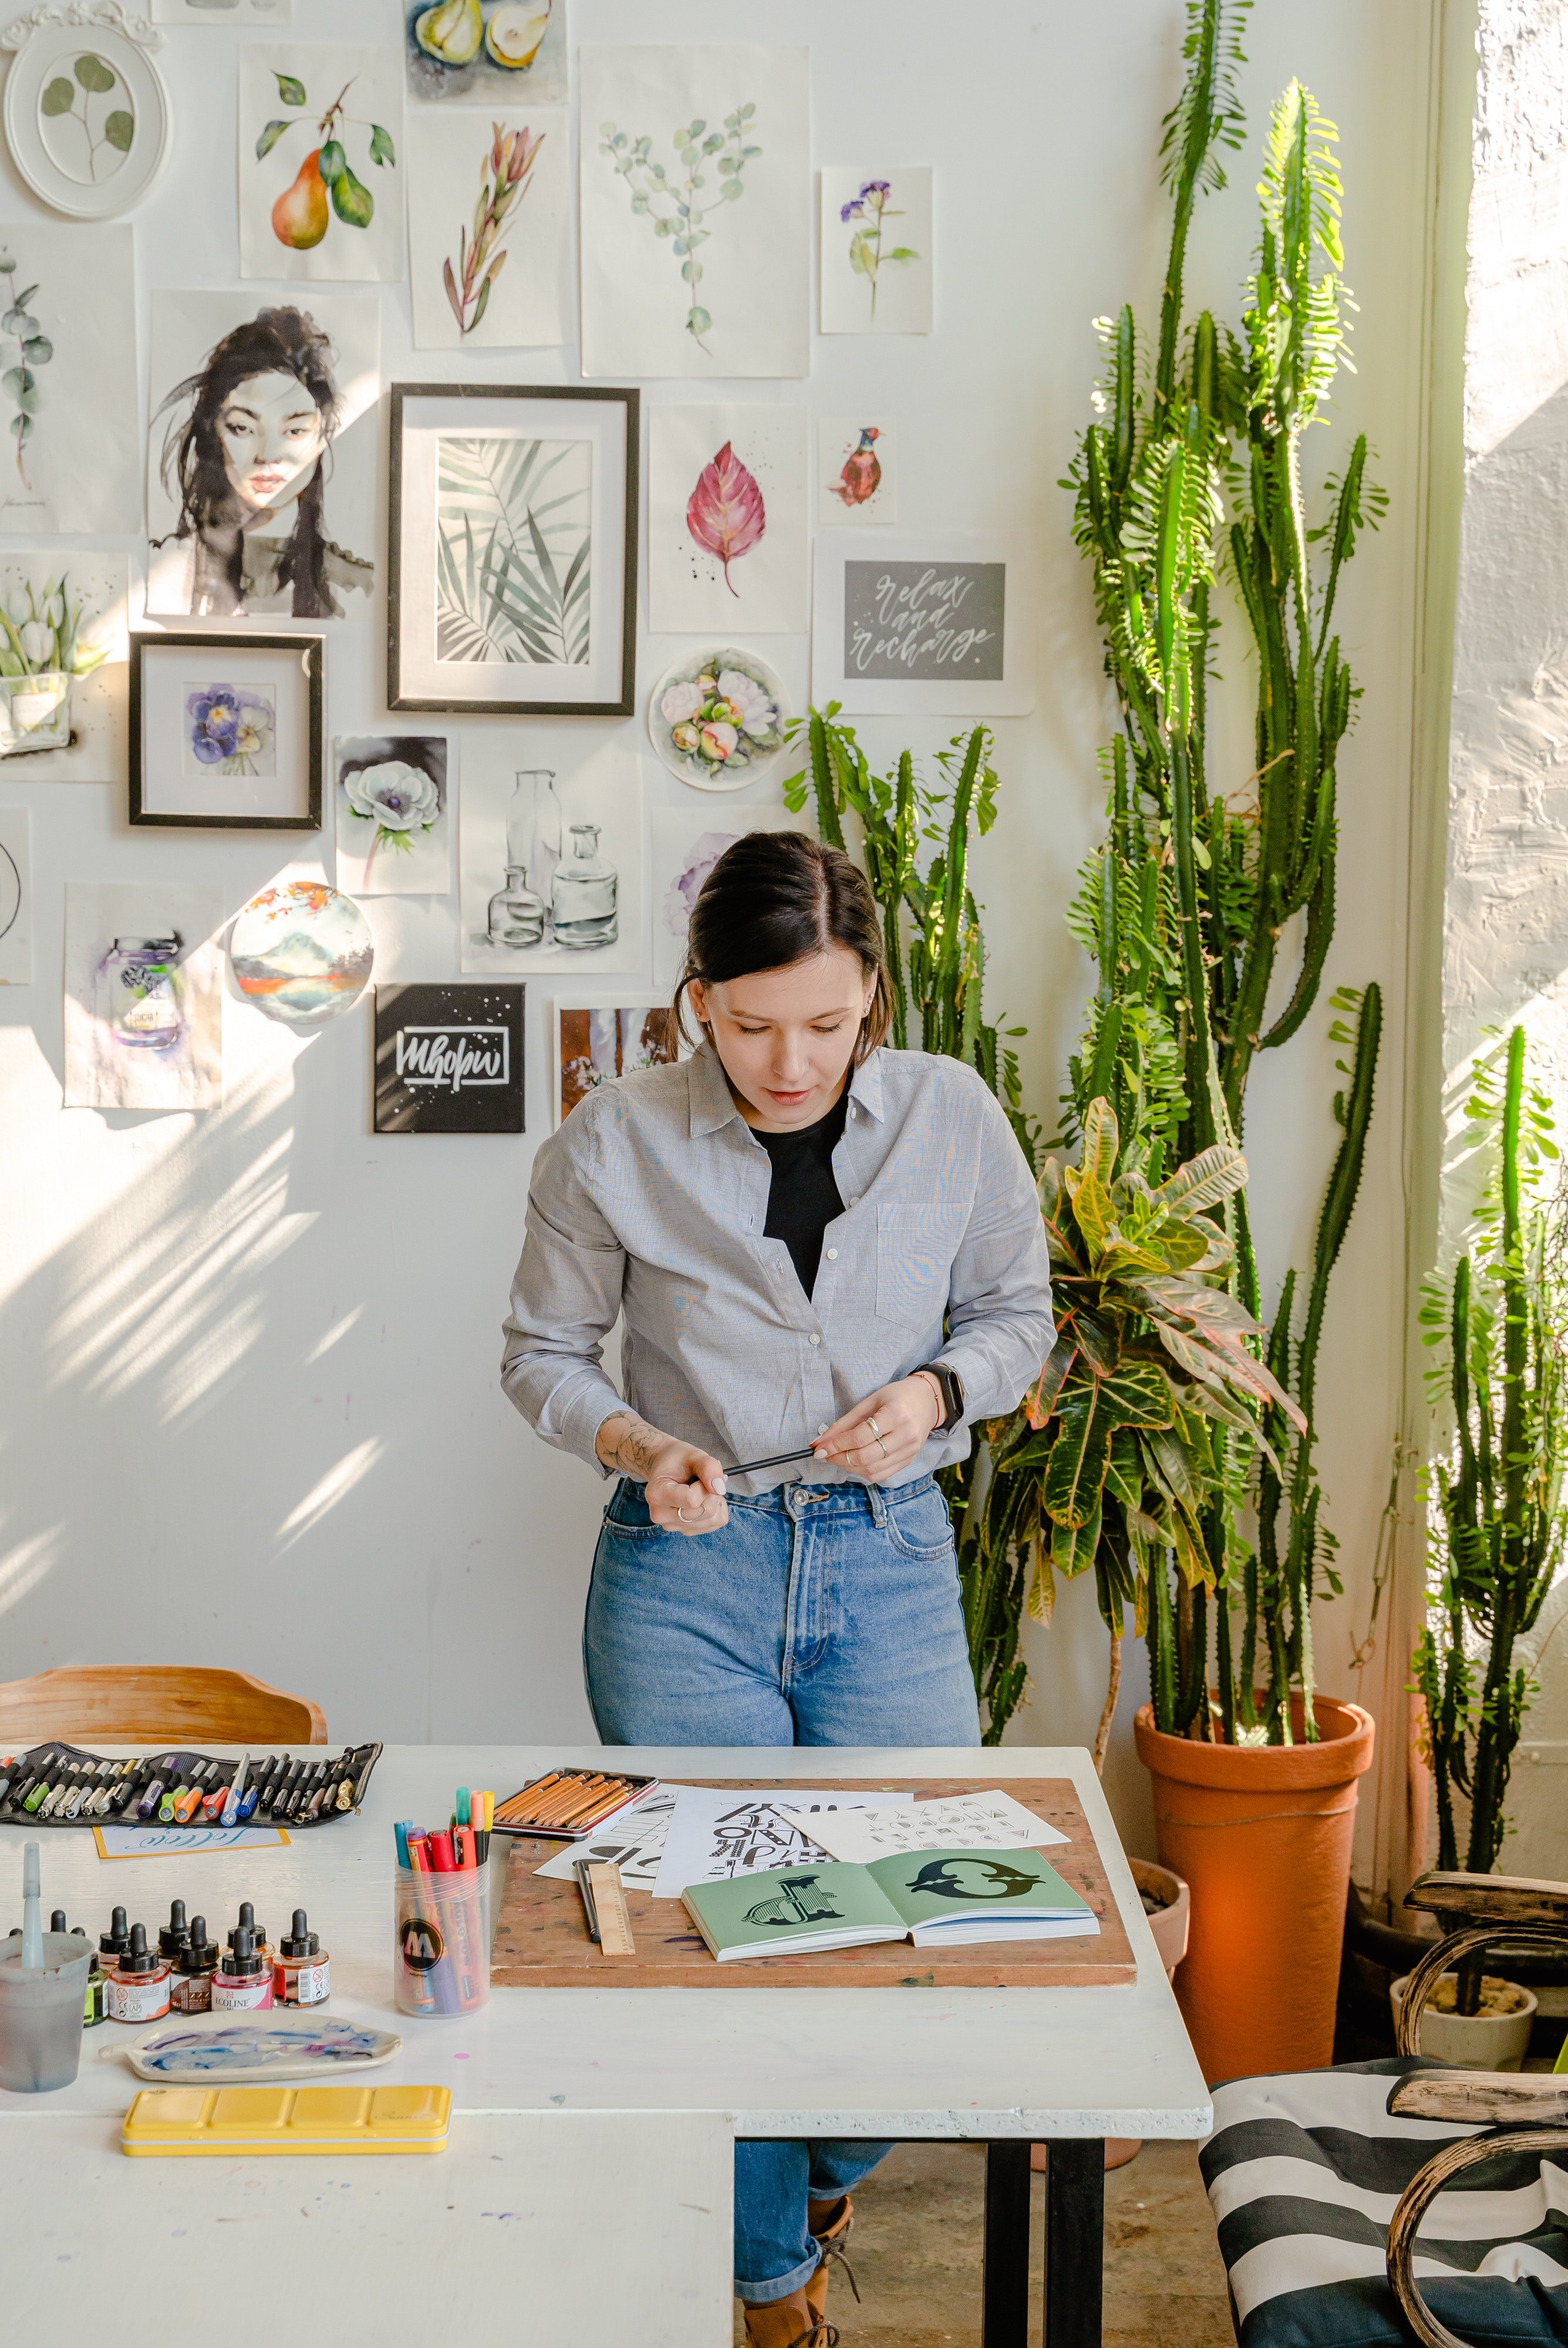 Woman stands at a table looking at artwork against a backdrop of pictures and plants